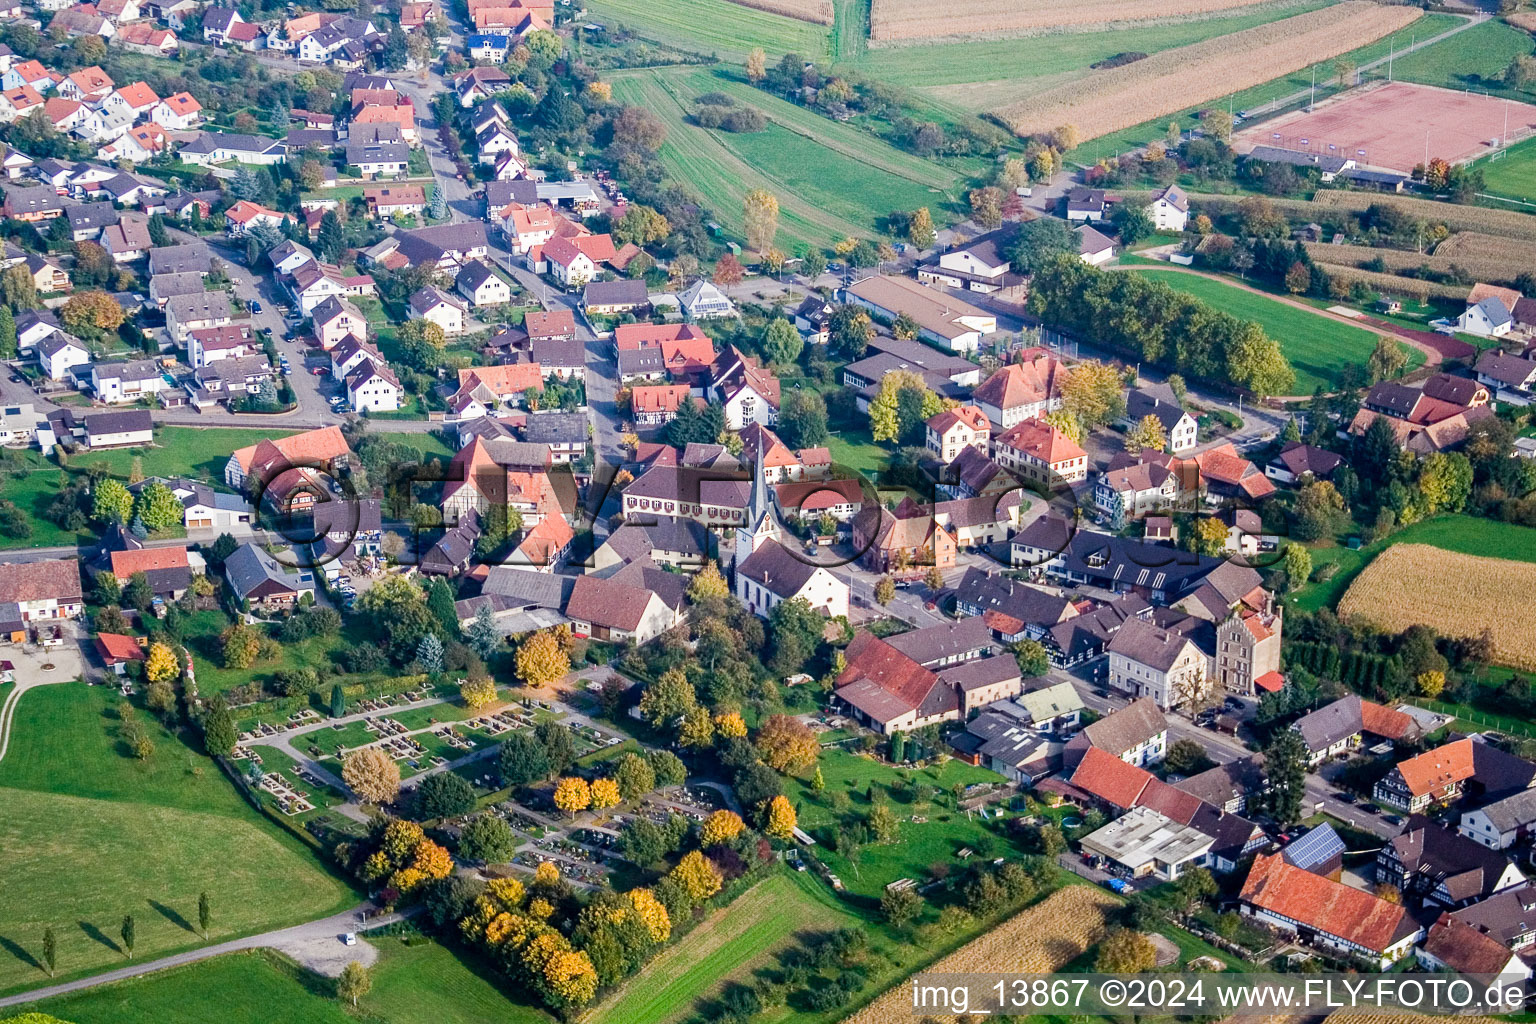 Village - view on the edge of agricultural fields and farmland in the district Legelshurst in Willstaett in the state Baden-Wurttemberg, Germany